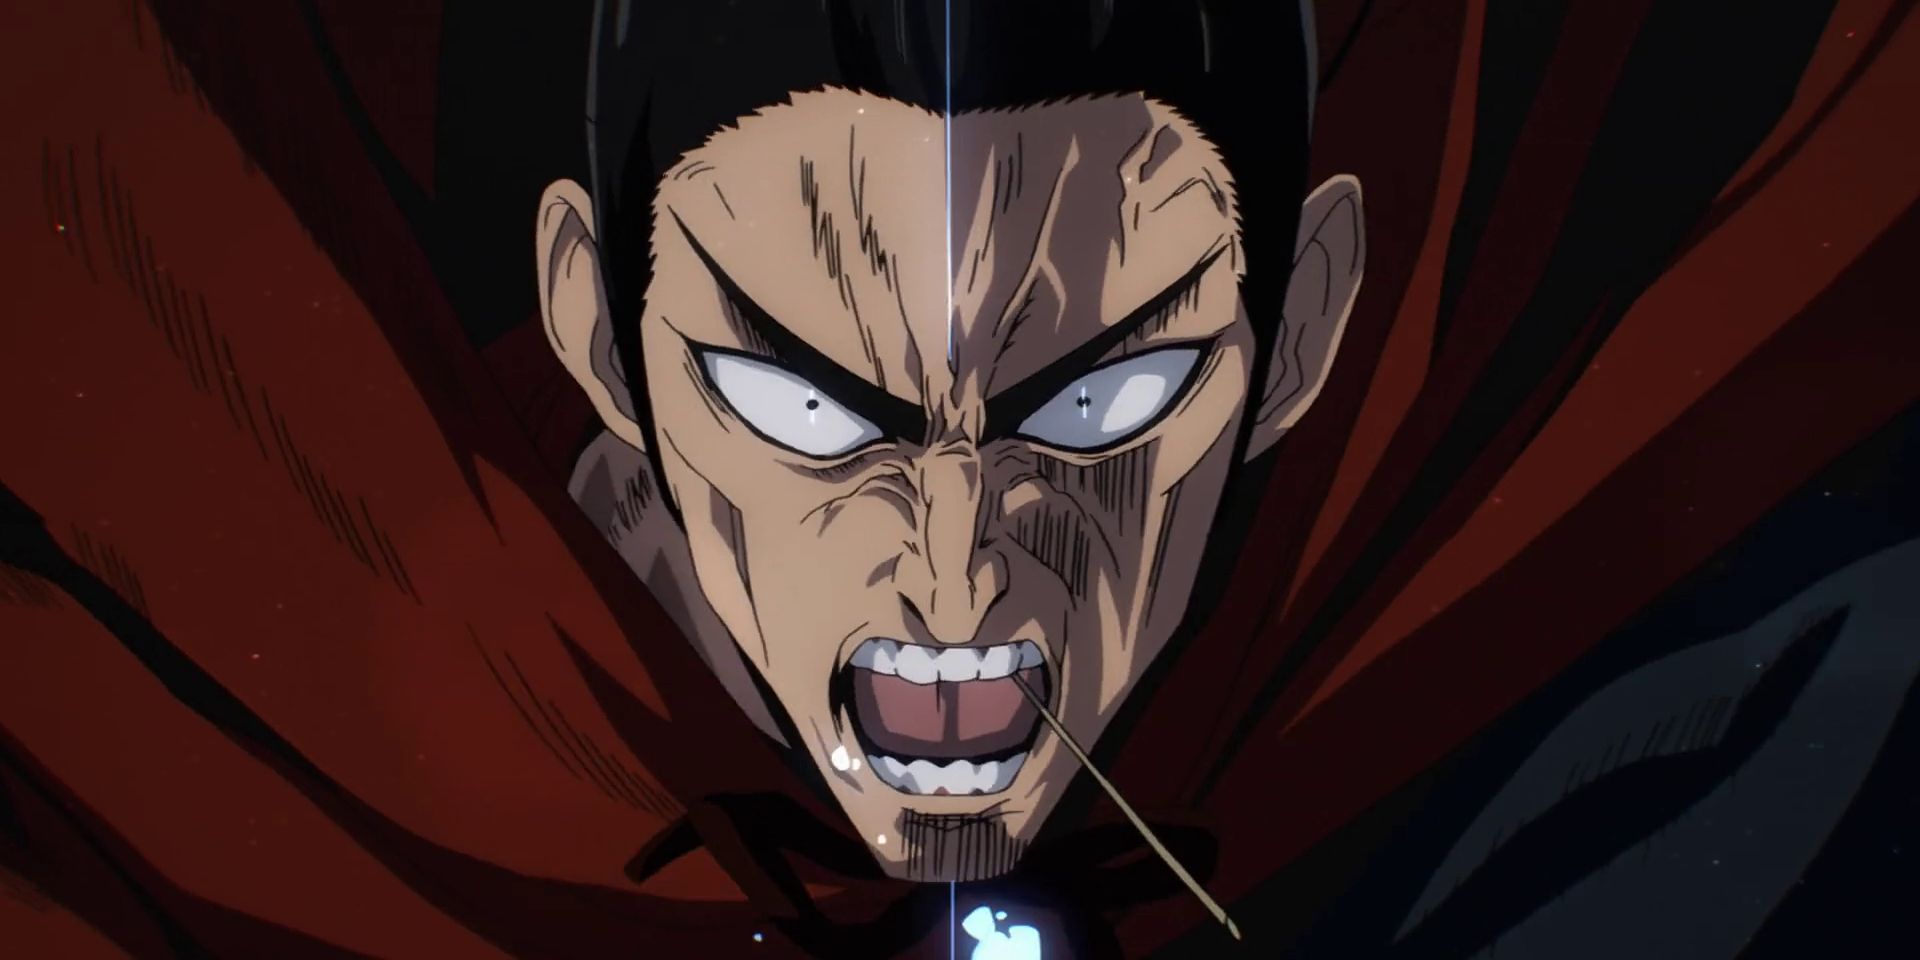 Atomic Samurai from the One Punch Man anime series yelling with straw in his mouth.